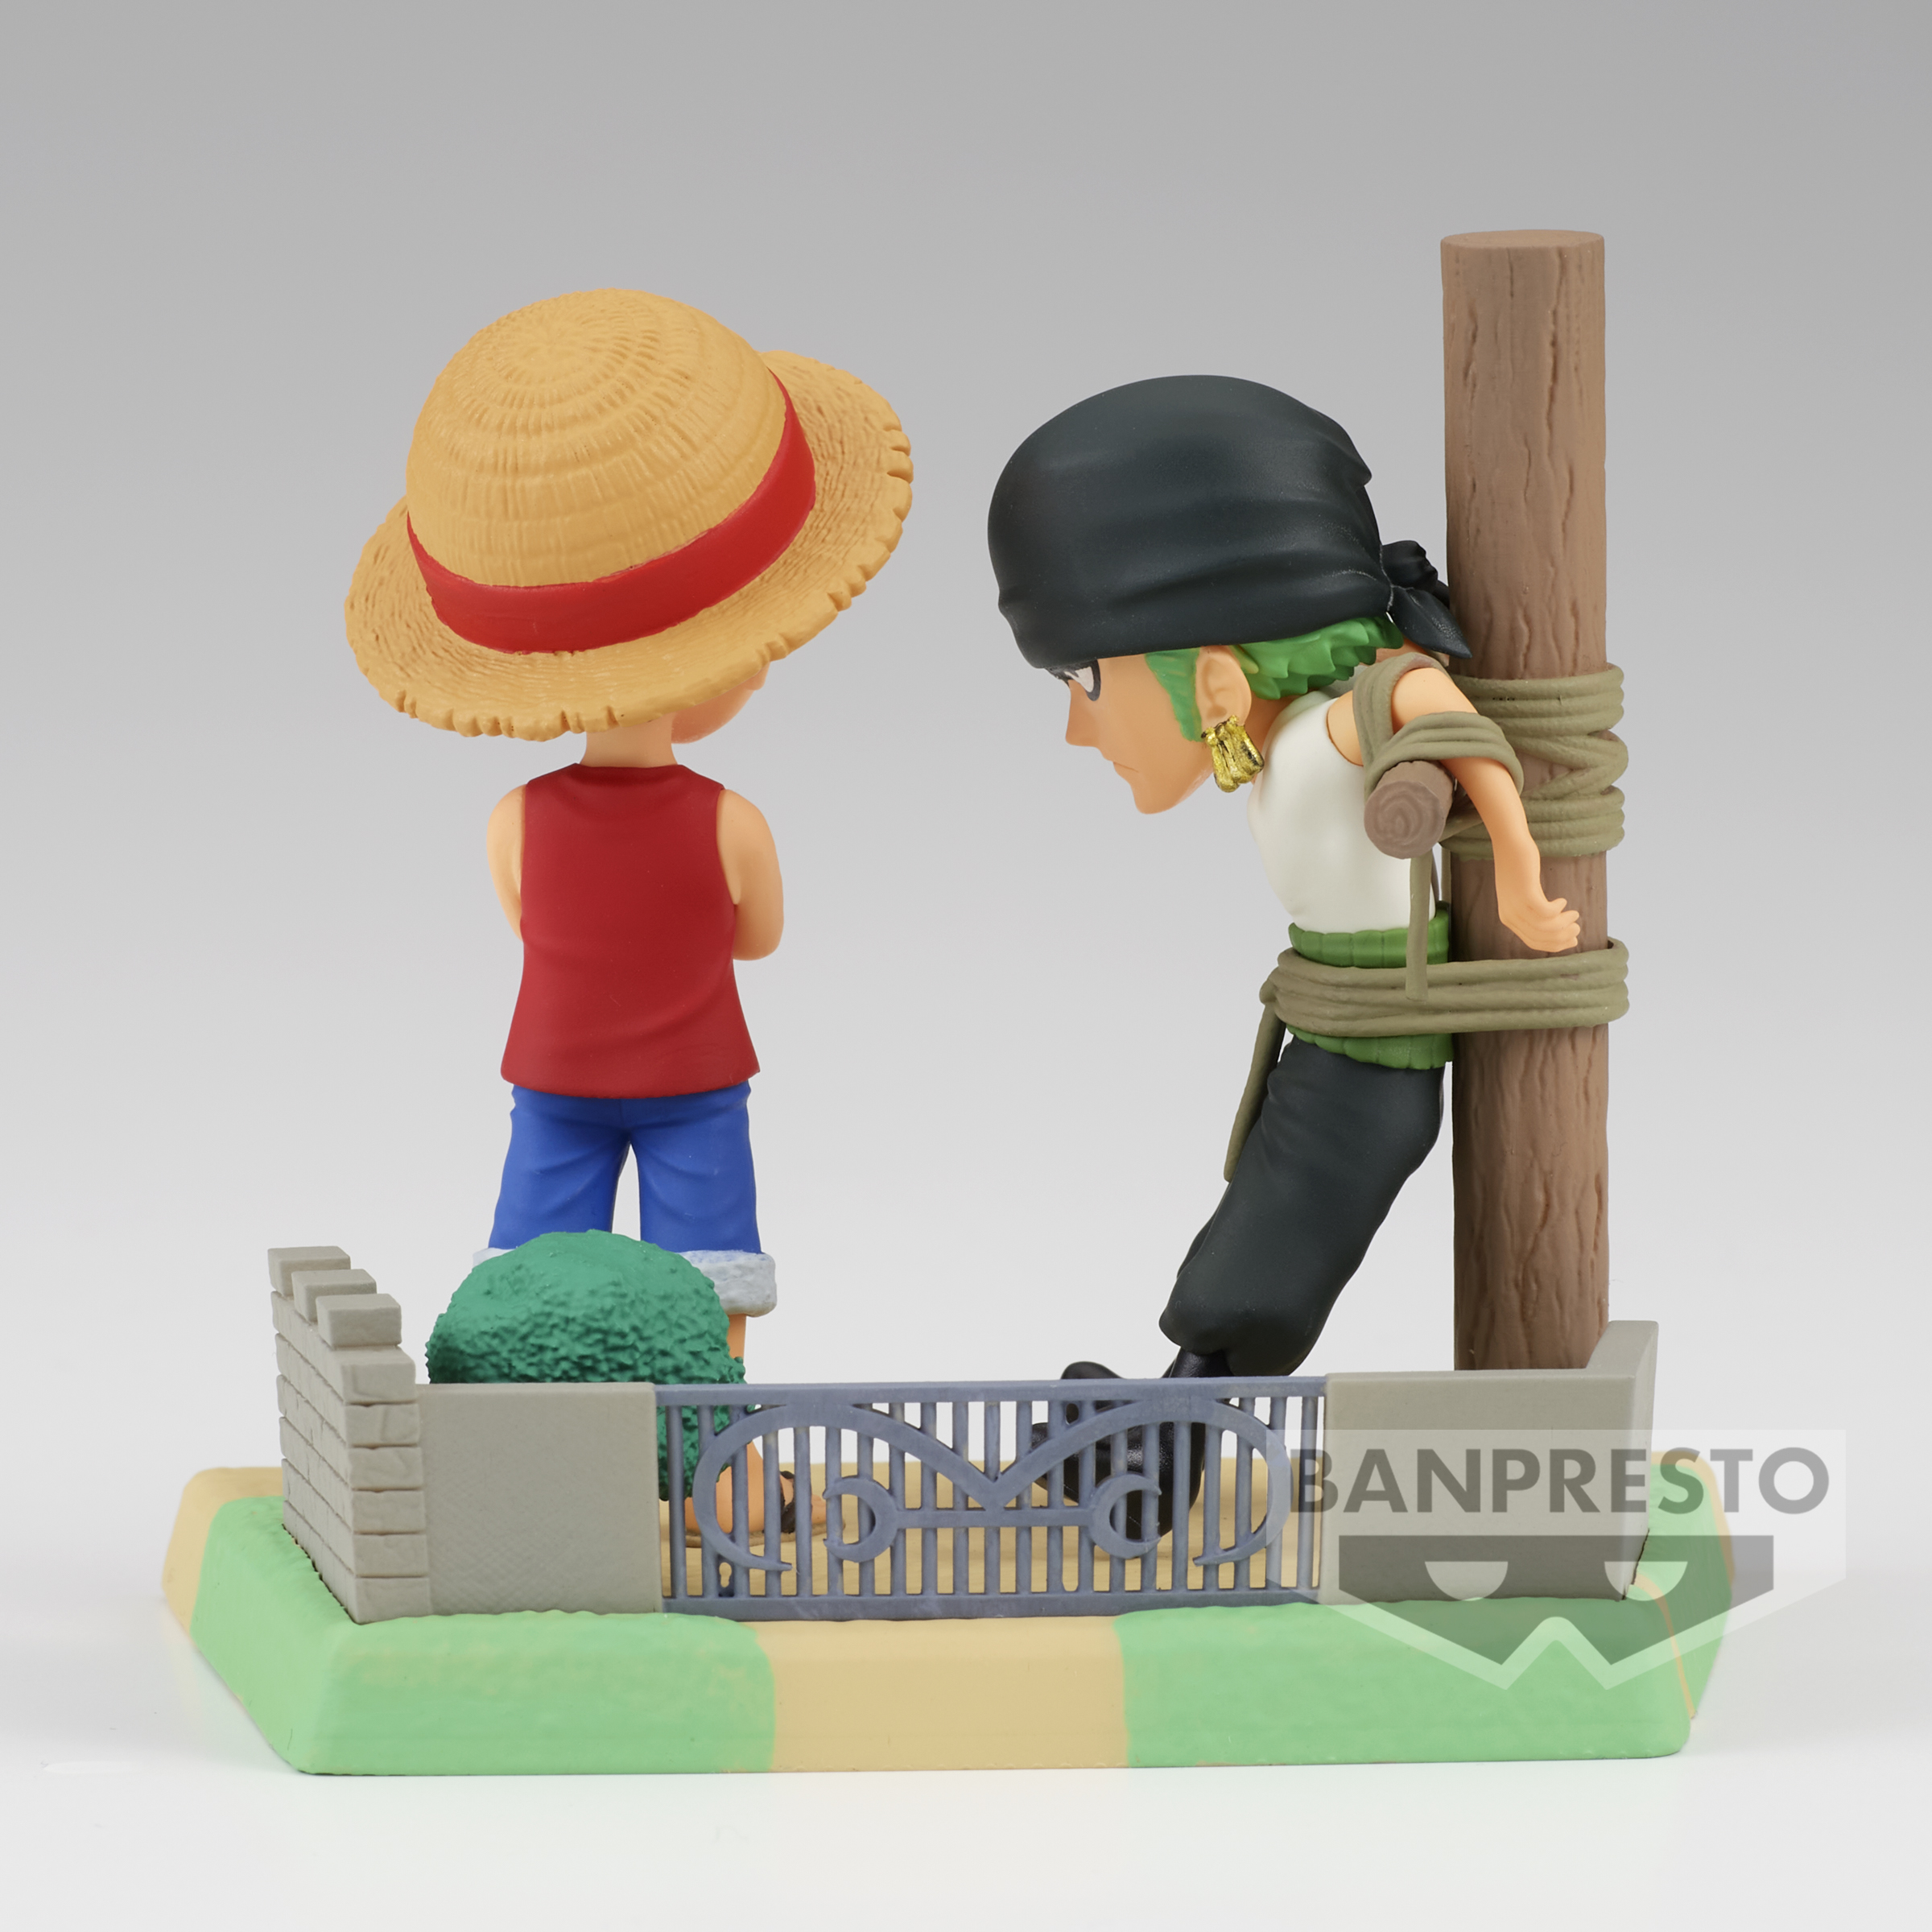 World Collectable Figure One Piece Log Stories Monkey D. Luffy & Roronoa  Zoro